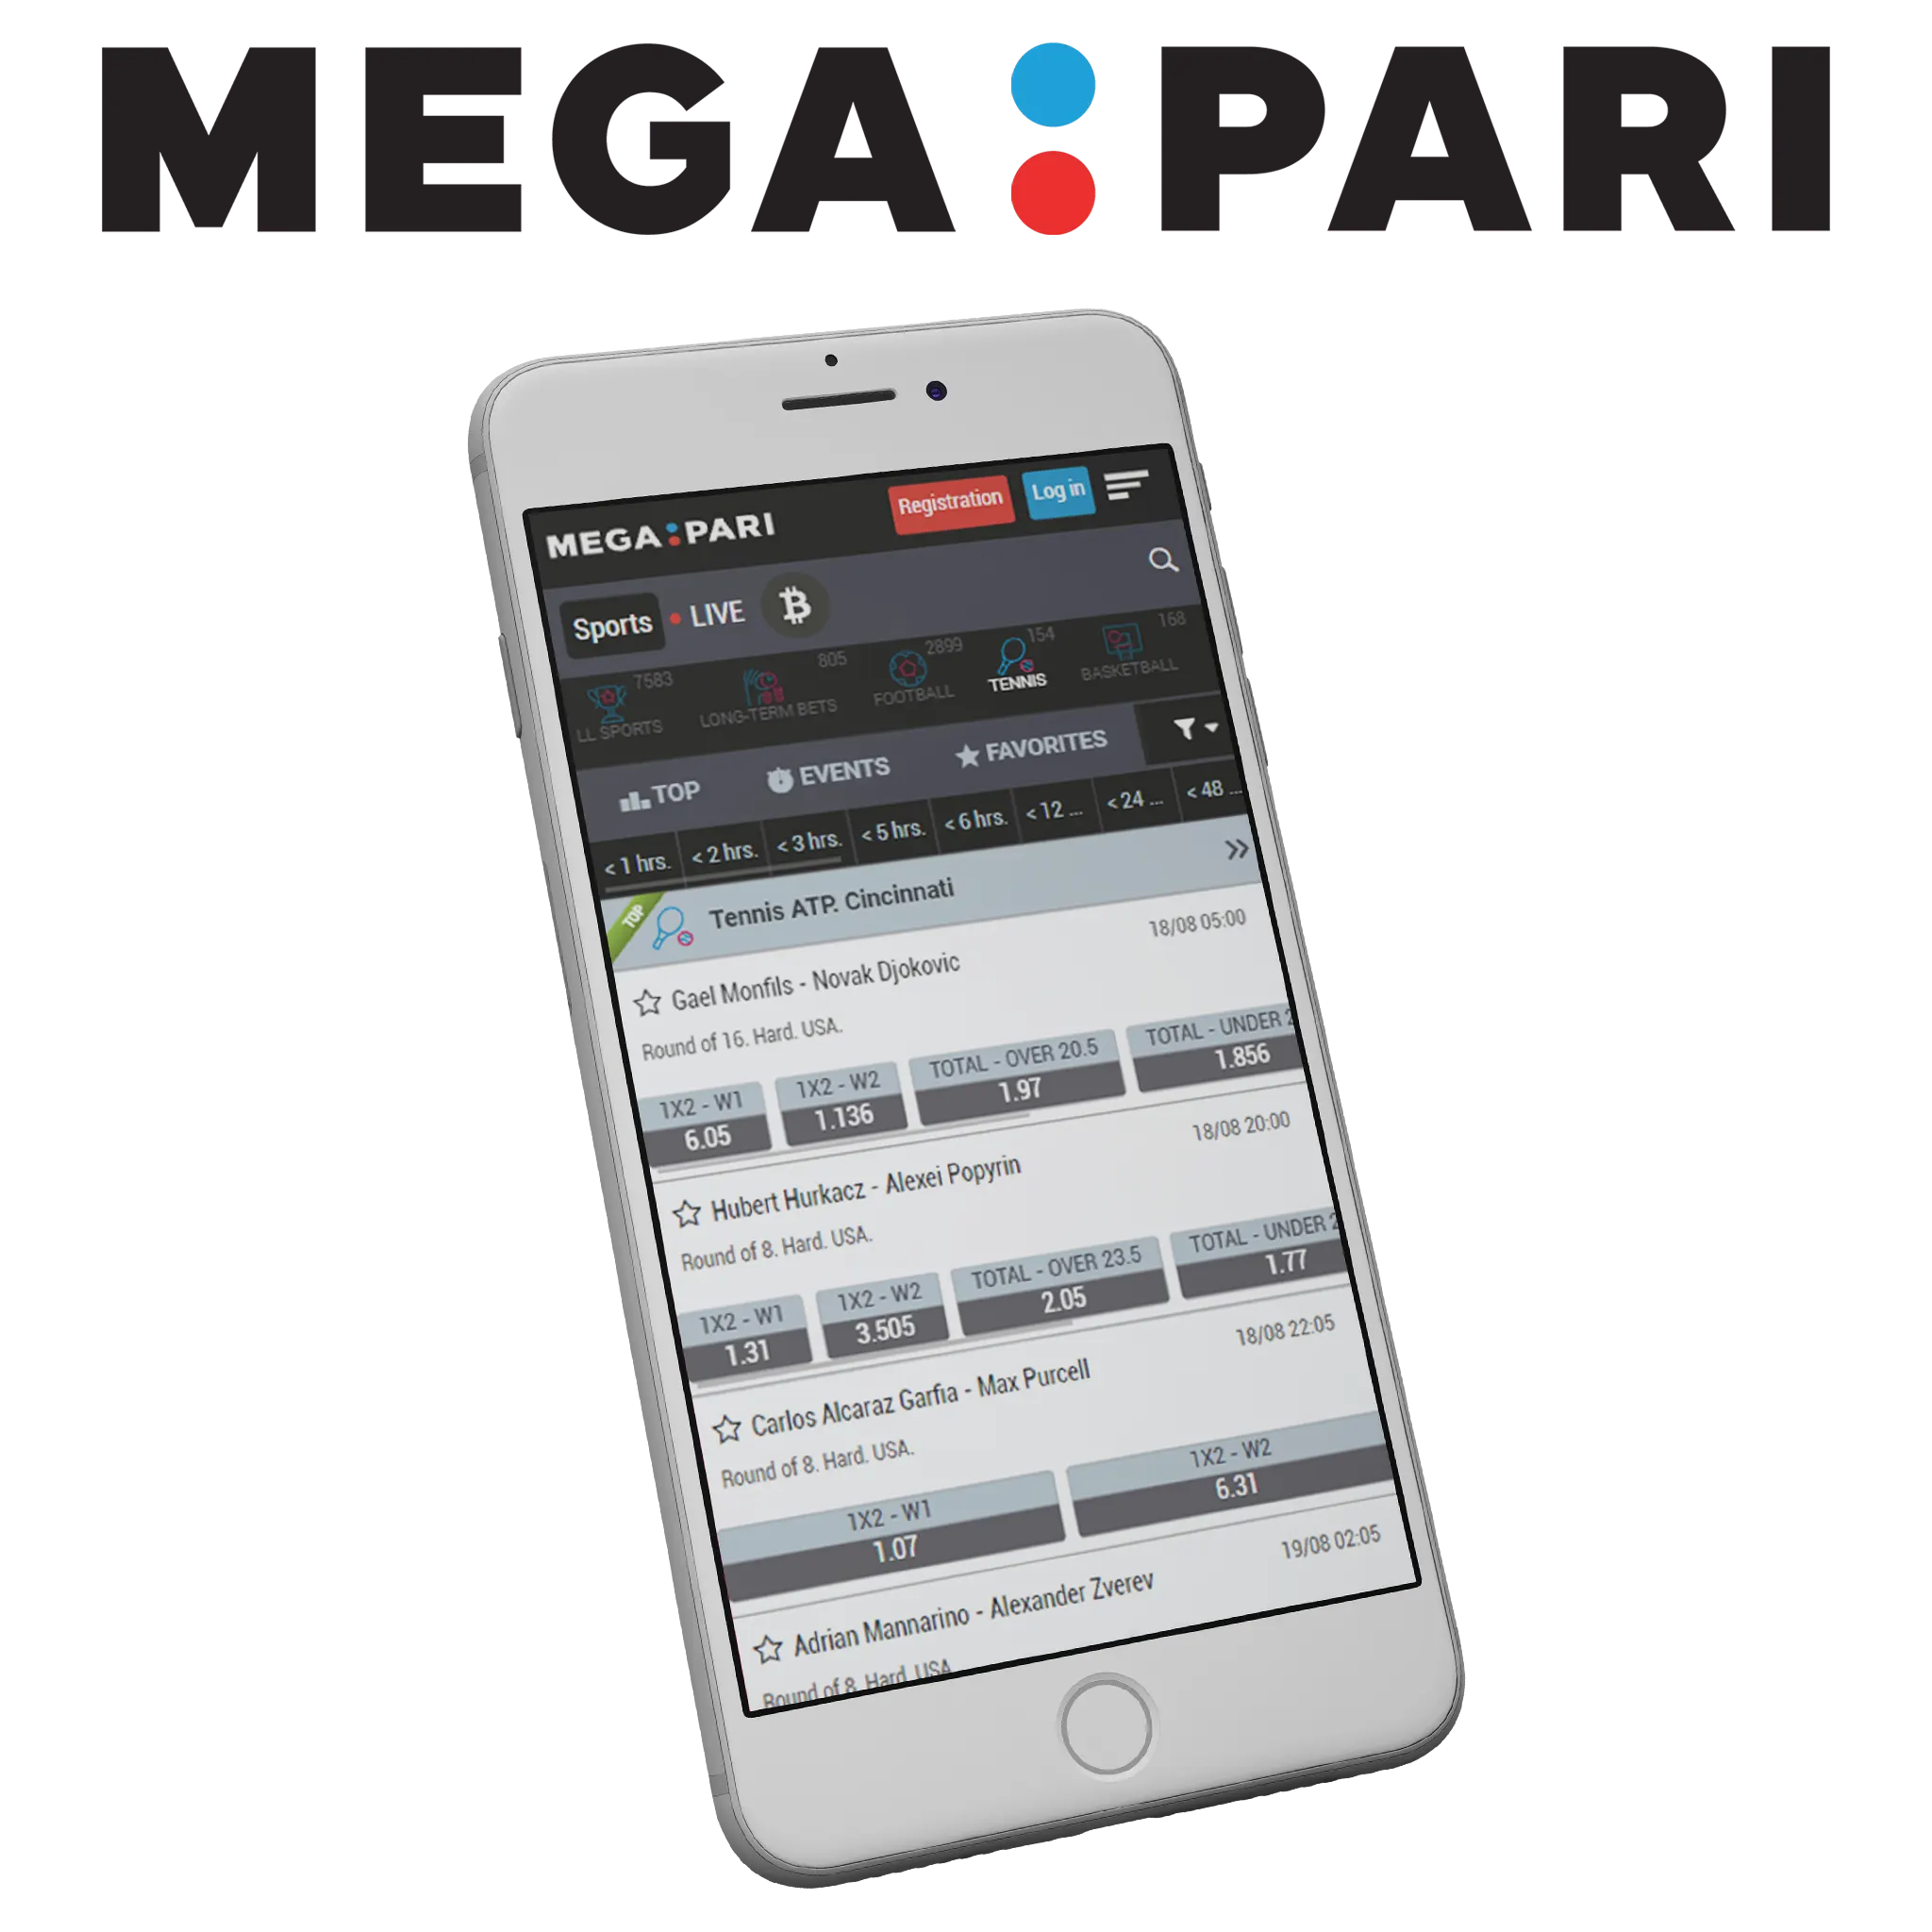 The Megapari app provides various payment options for tennis betting.